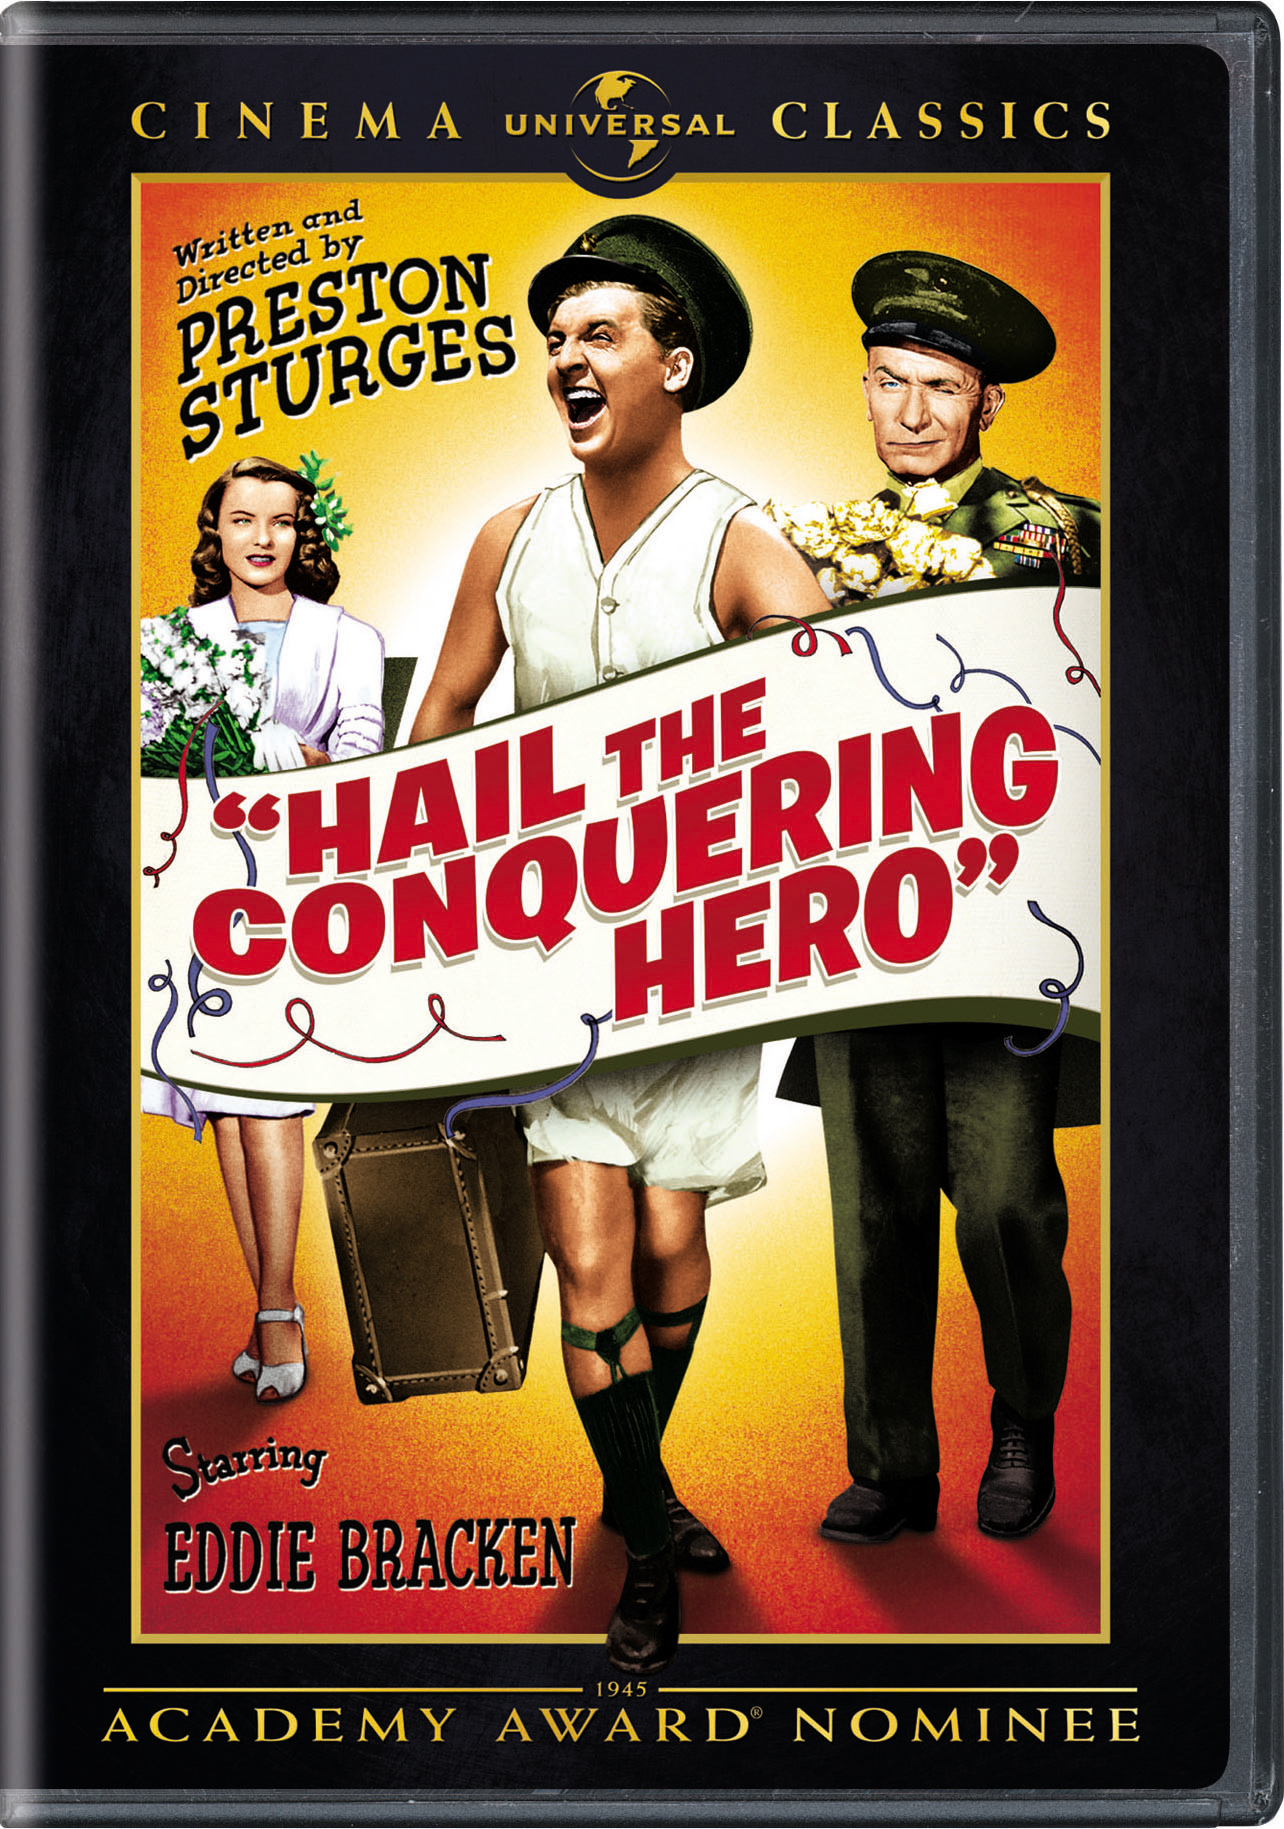 Hail The Conquering Hero (Unrated Edition) - DVD [ 1944 ]  - Classic Movies On DVD - Movies On GRUV